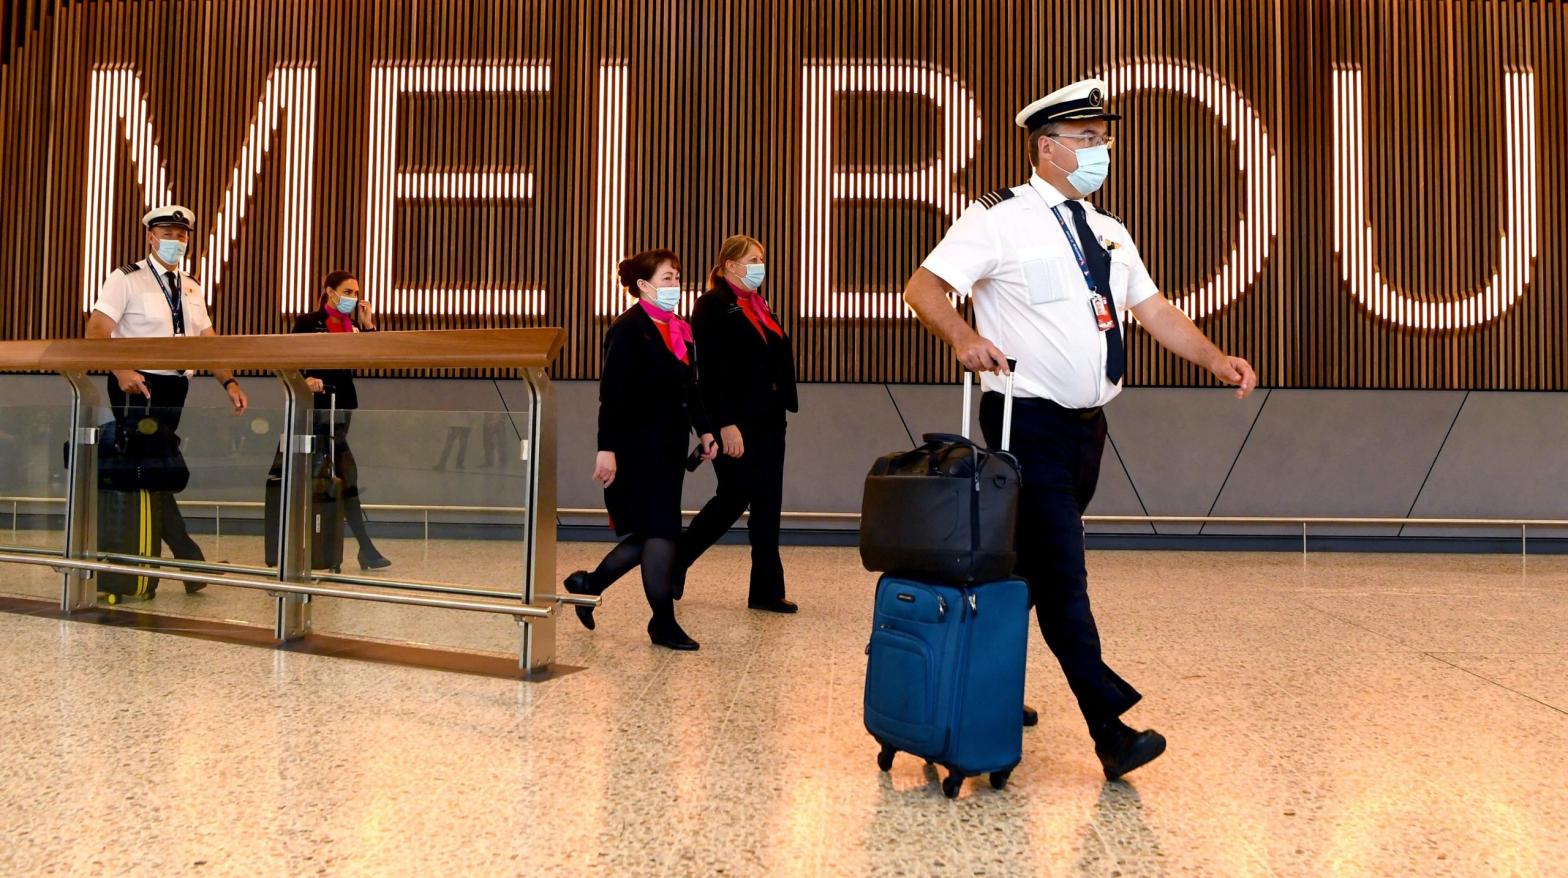 A Qantas flight crew arrive at Melbourne's Tullamarine Airport on November 29, 2021. (Photo: William West / AFP, Getty Images)